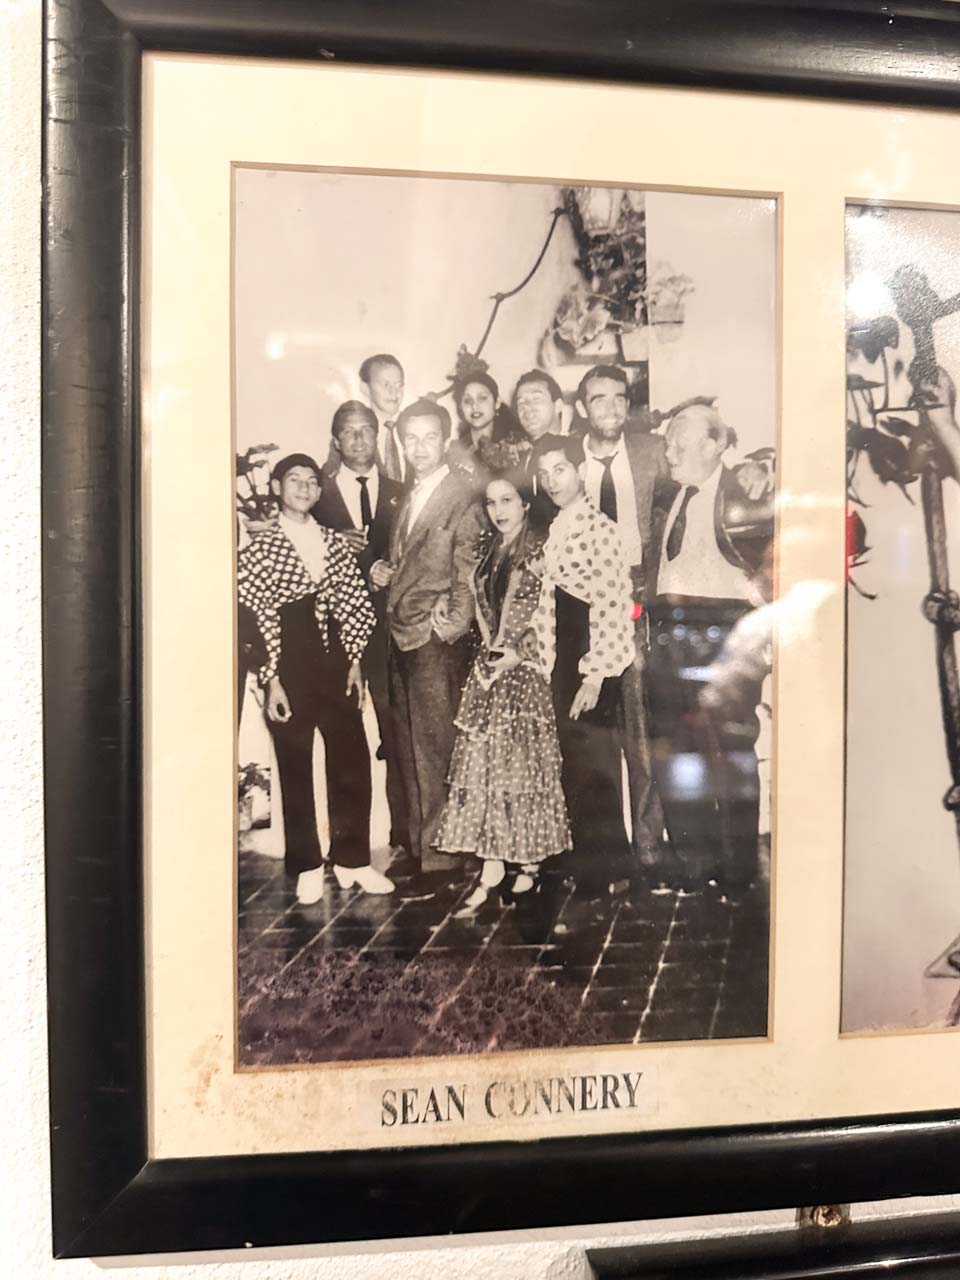 A framed black and white photo of a group including Sean Connery, displayed on a wall among other pictures at Bodega El Pimpi in Malaga, Spain